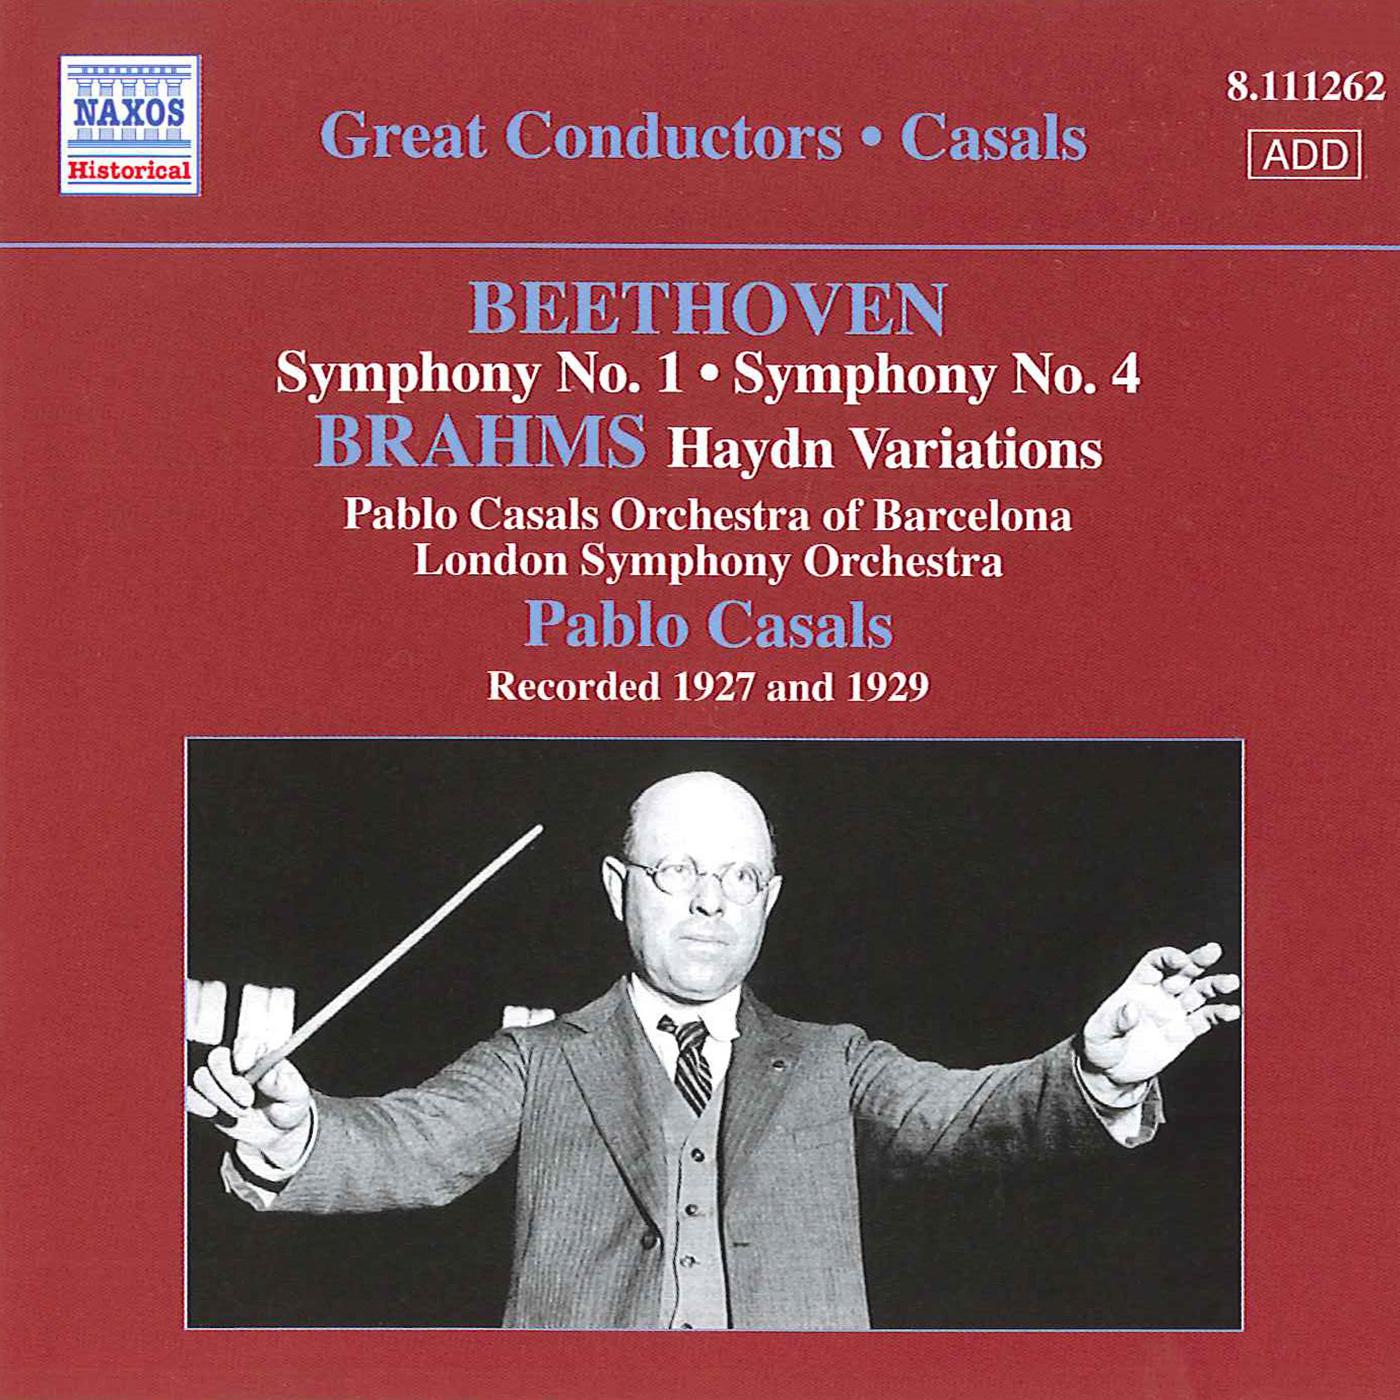 Variations on a Theme by Haydn, Op. 56a, "St. Anthony Variations": Variation 7: Grazioso